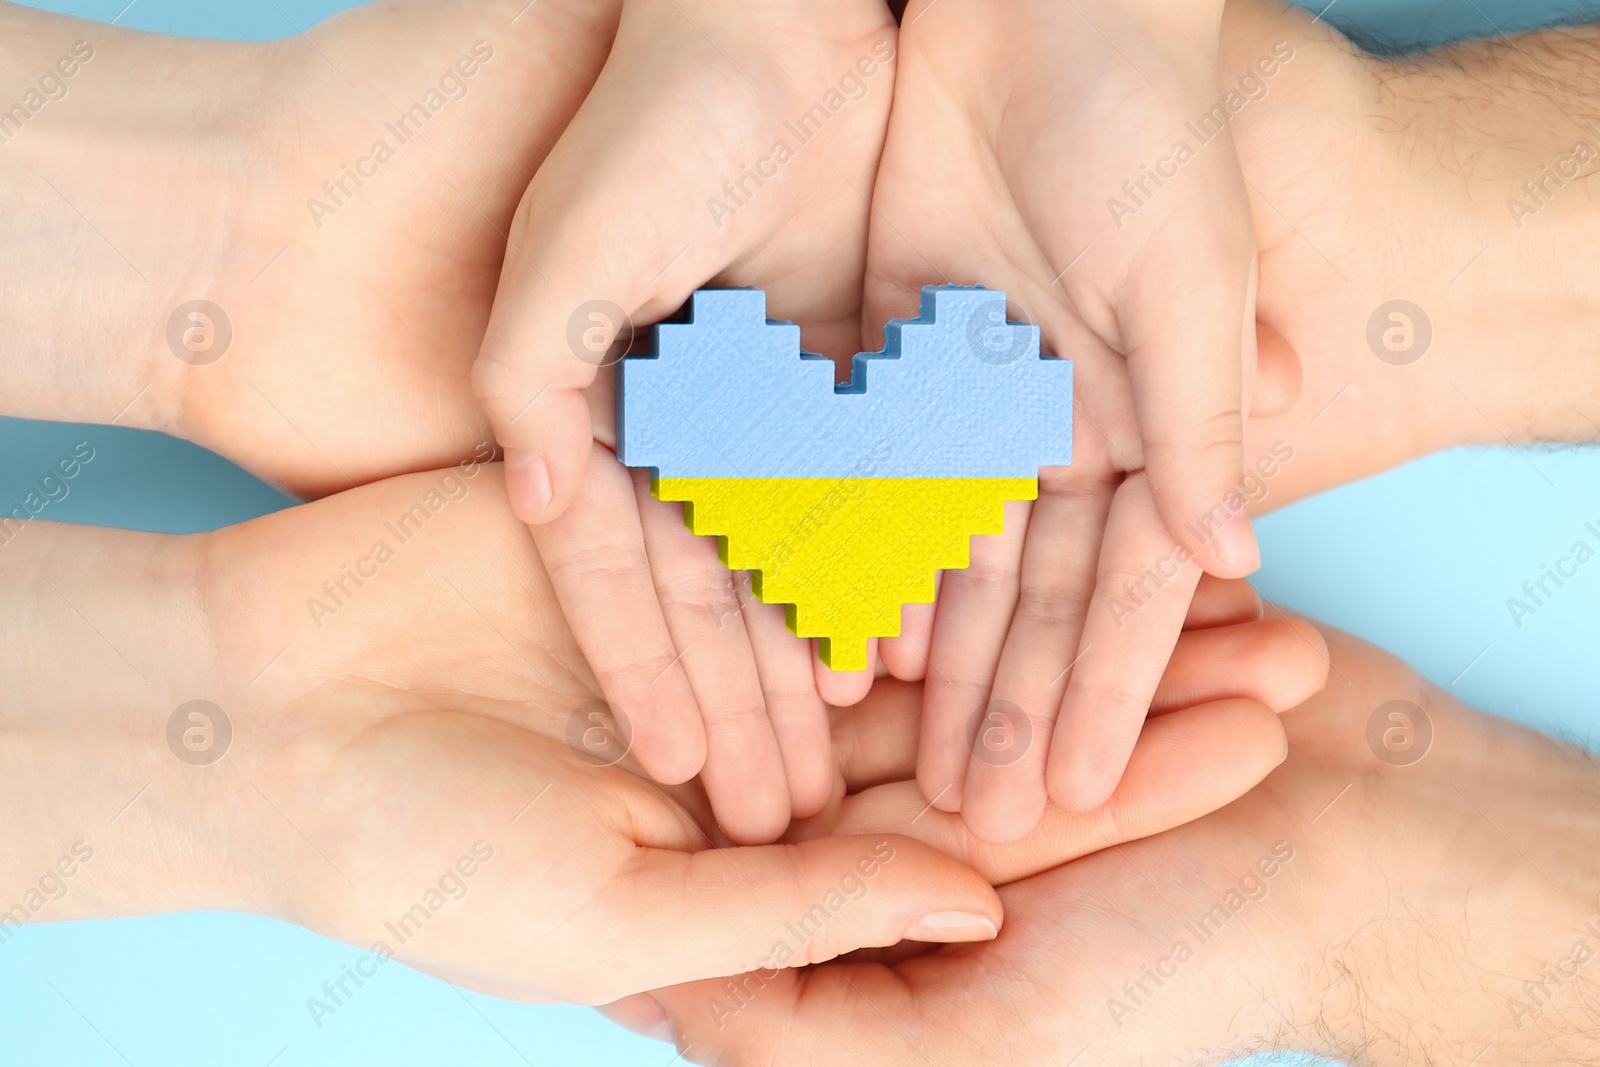 Image of Stop war in Ukraine. Family holding heart shaped toy with colors of Ukrainian flag in hands on light blue background, closeup